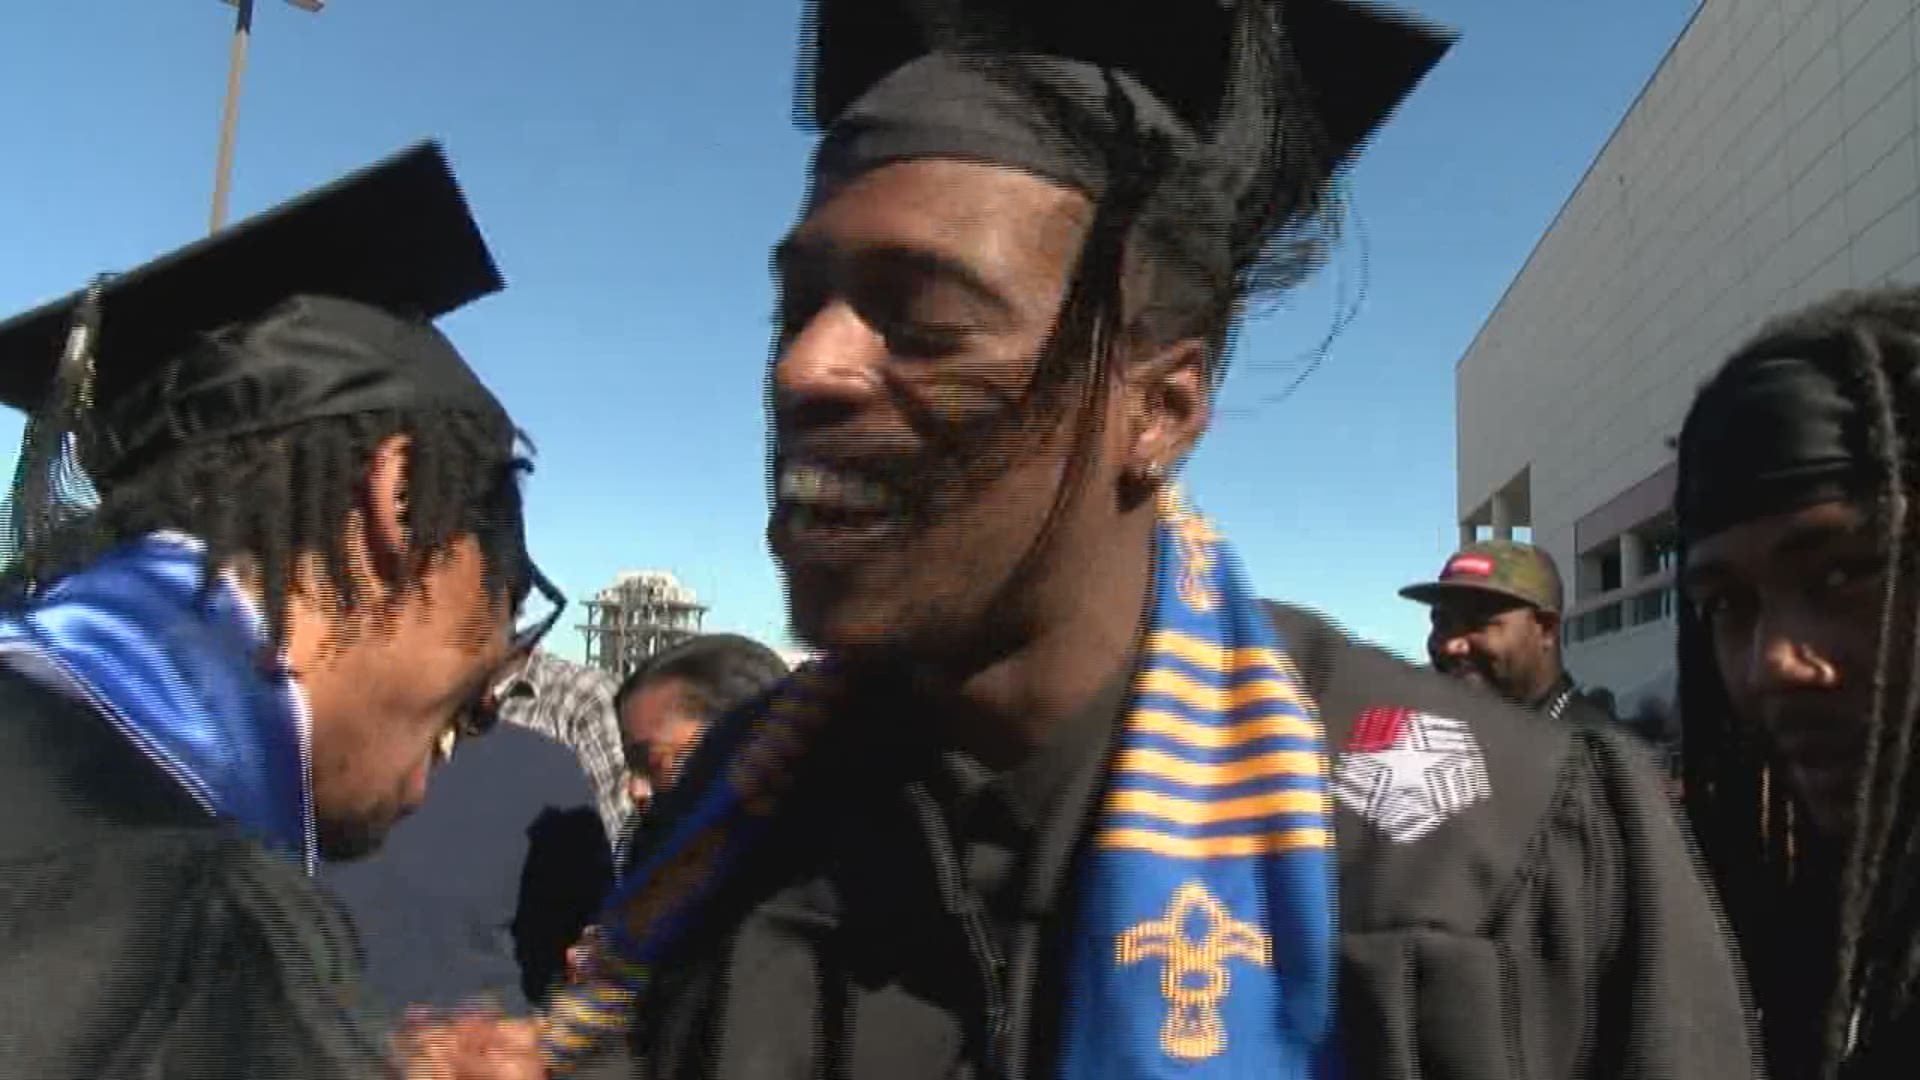 Lamar graduates excited to receive their degrees